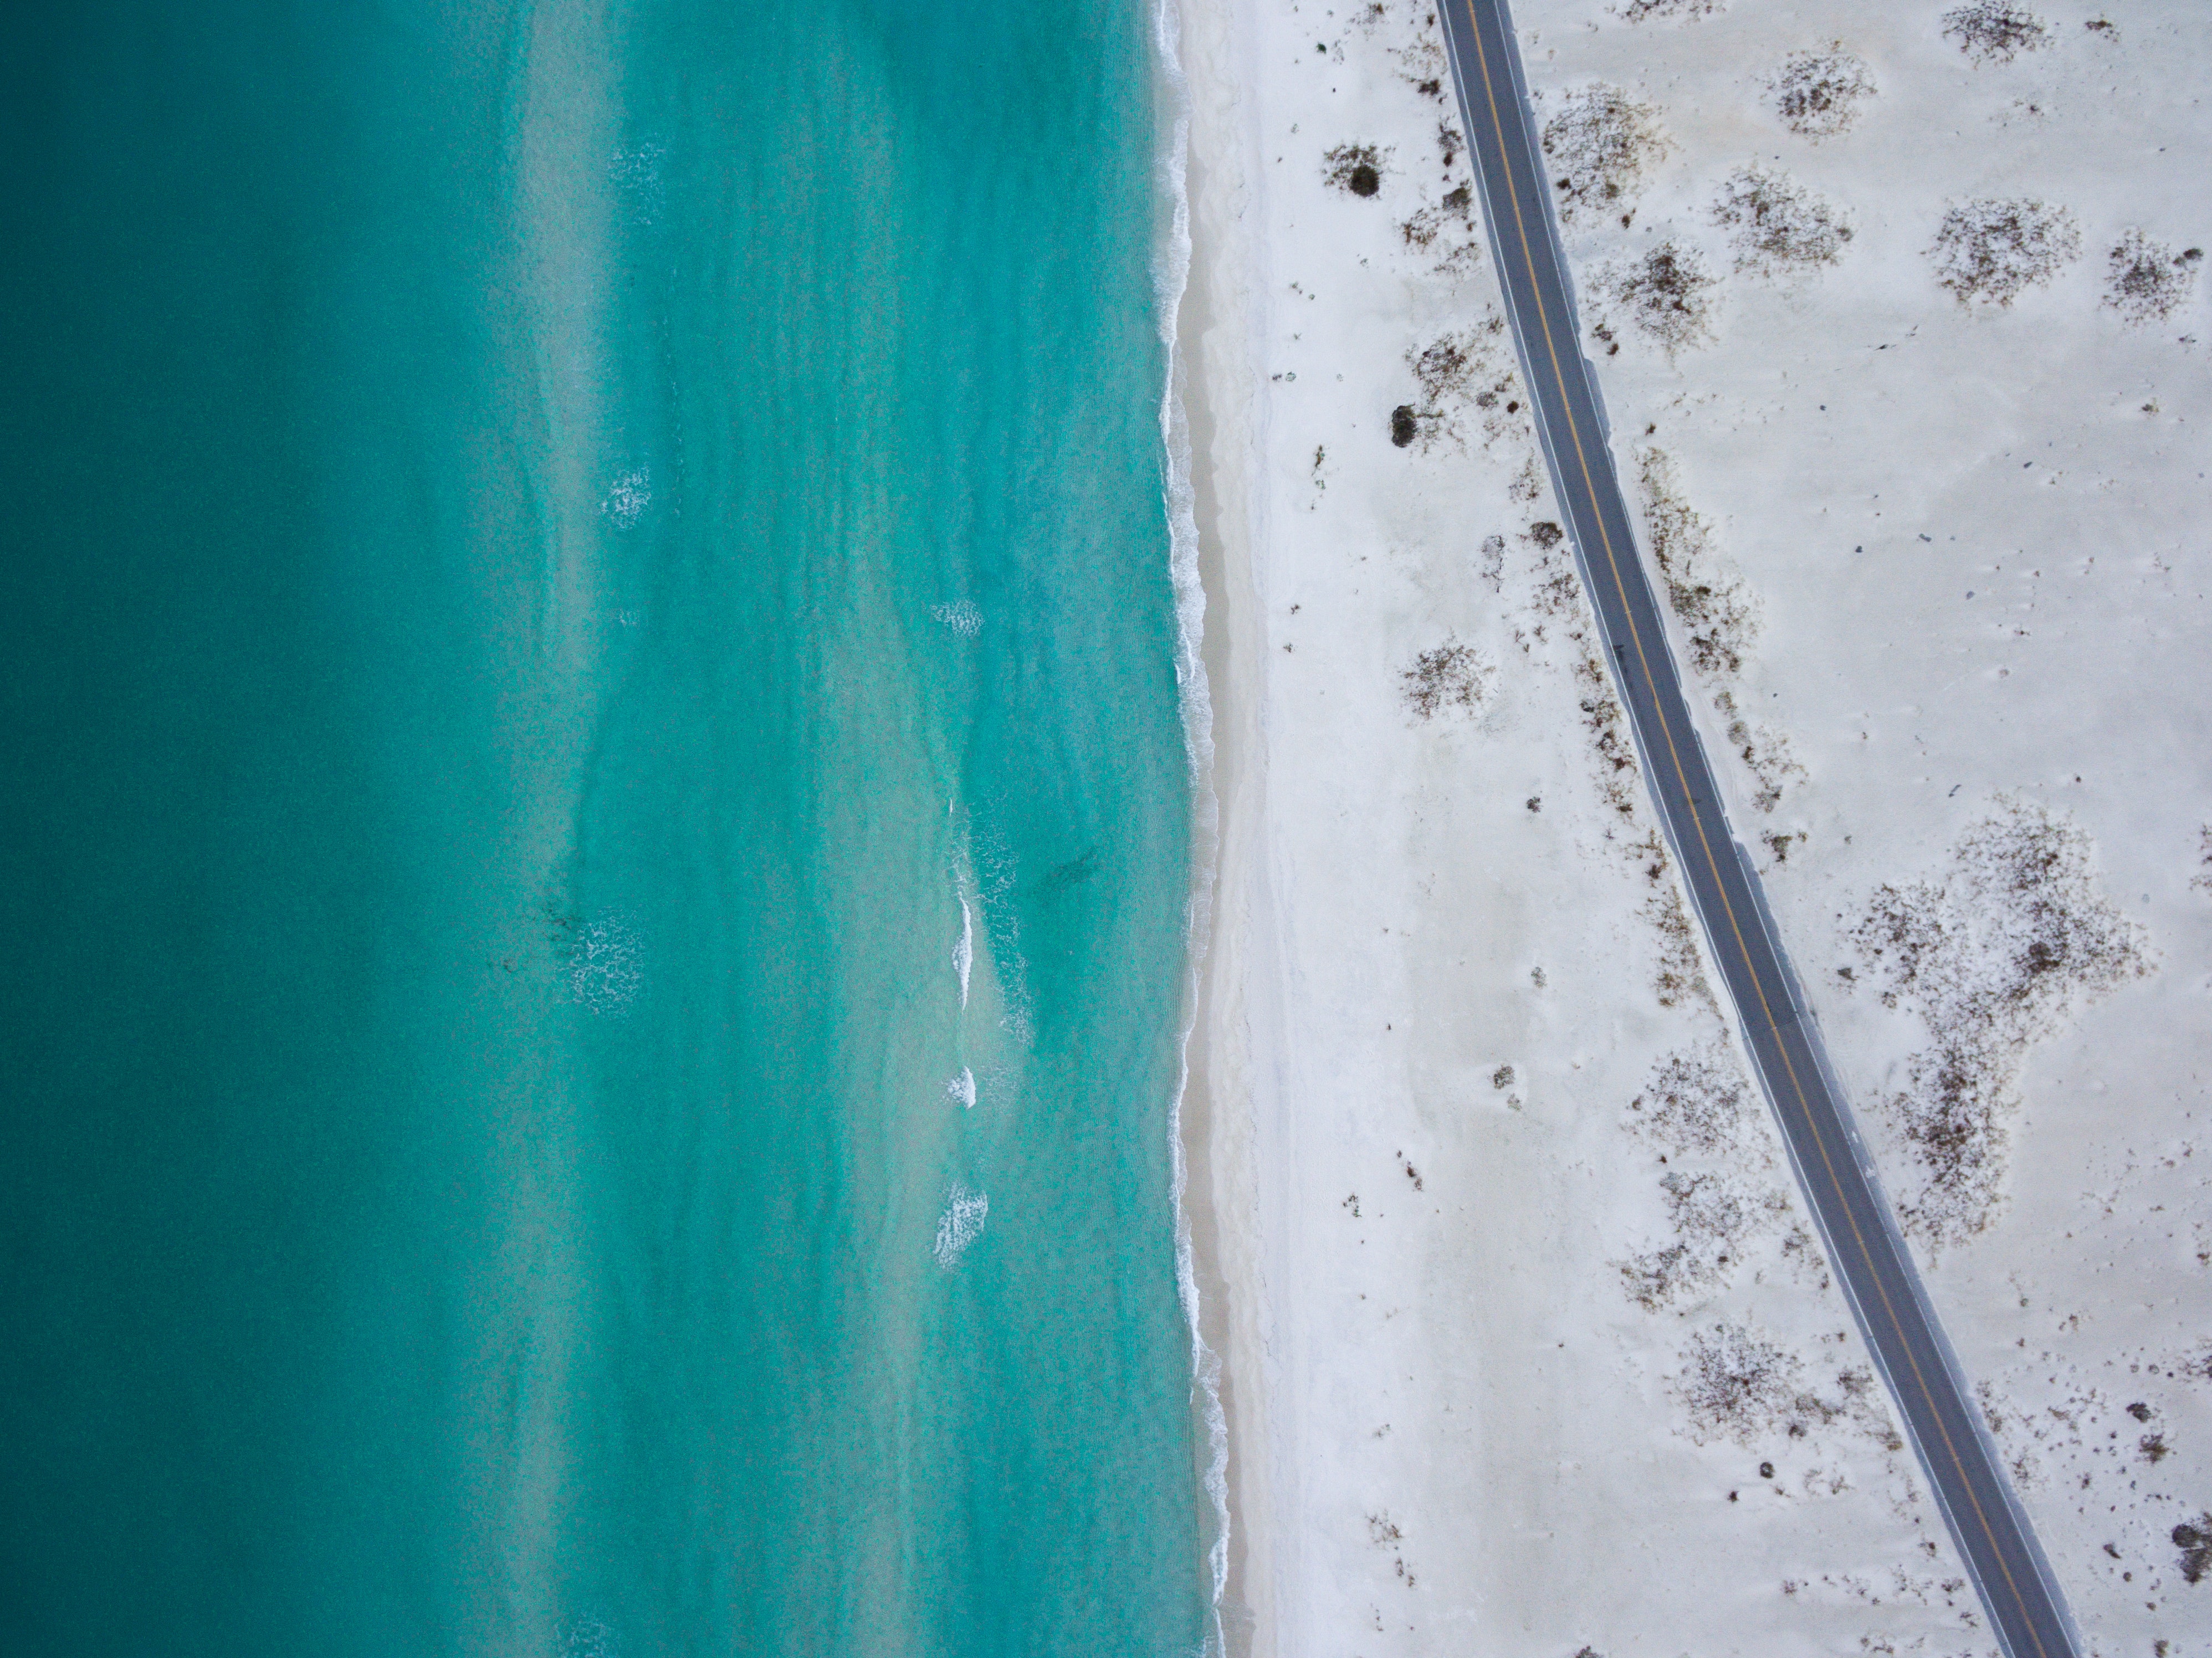 Bird's eye view of a road along a beach during daytime